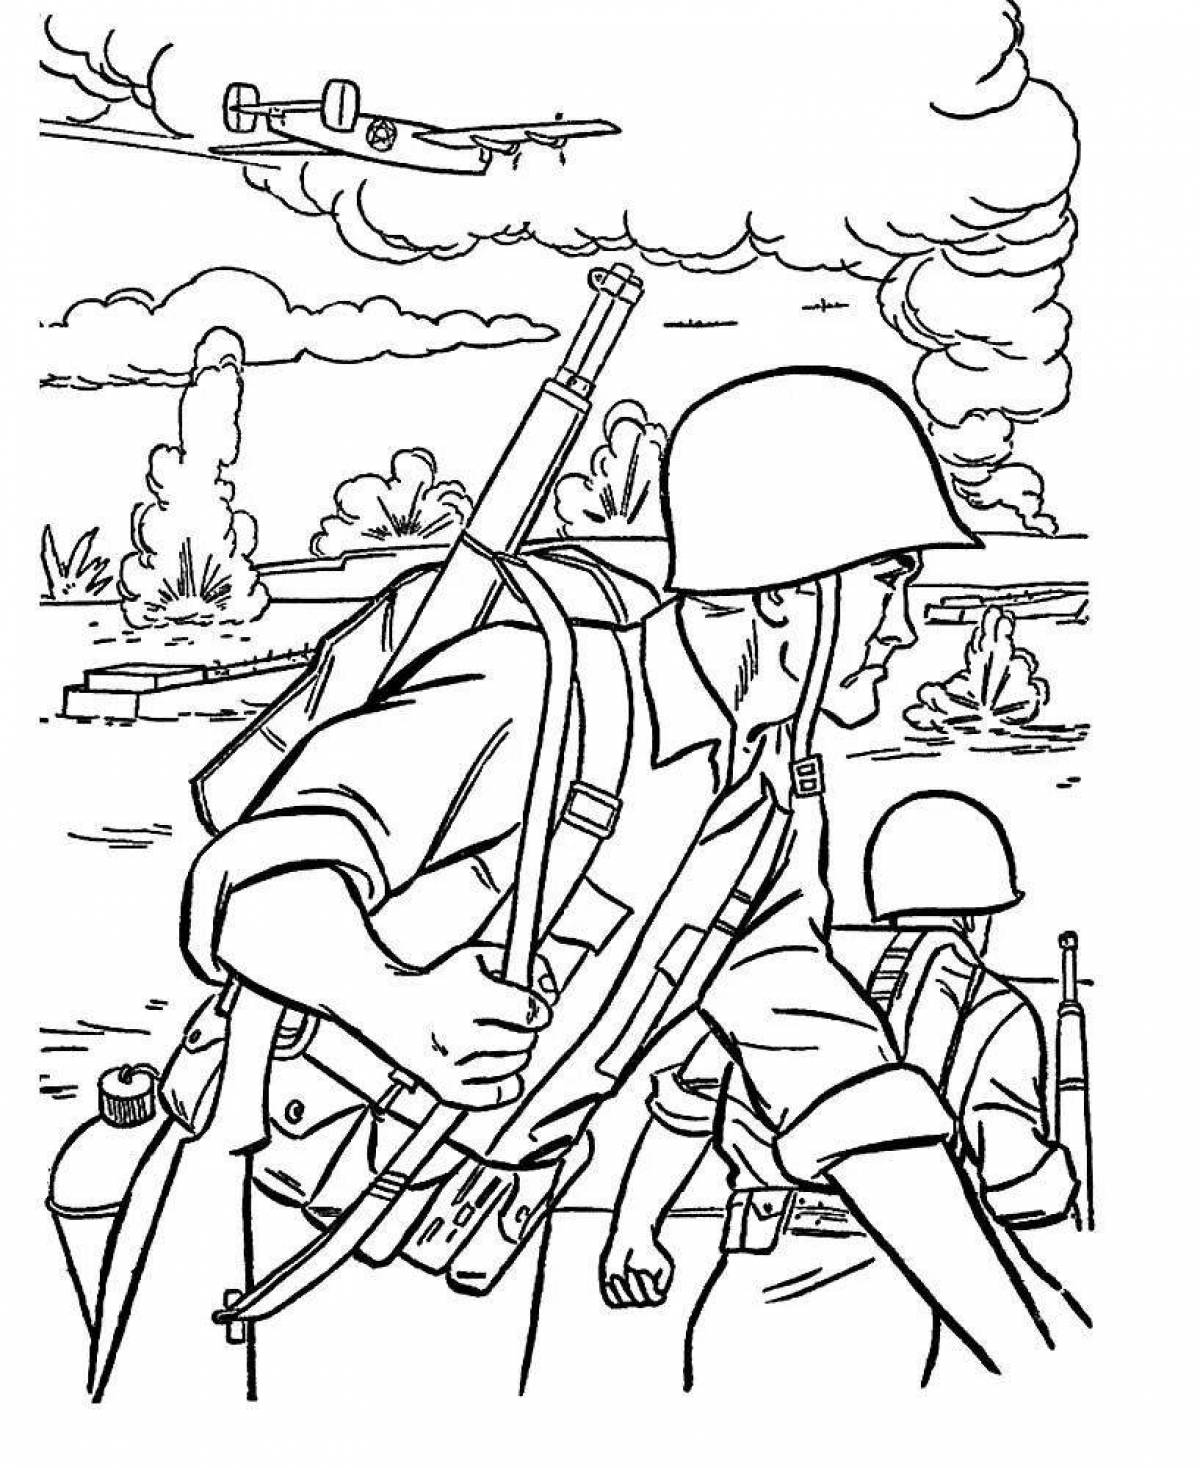 Refreshing war coloring page for preschoolers